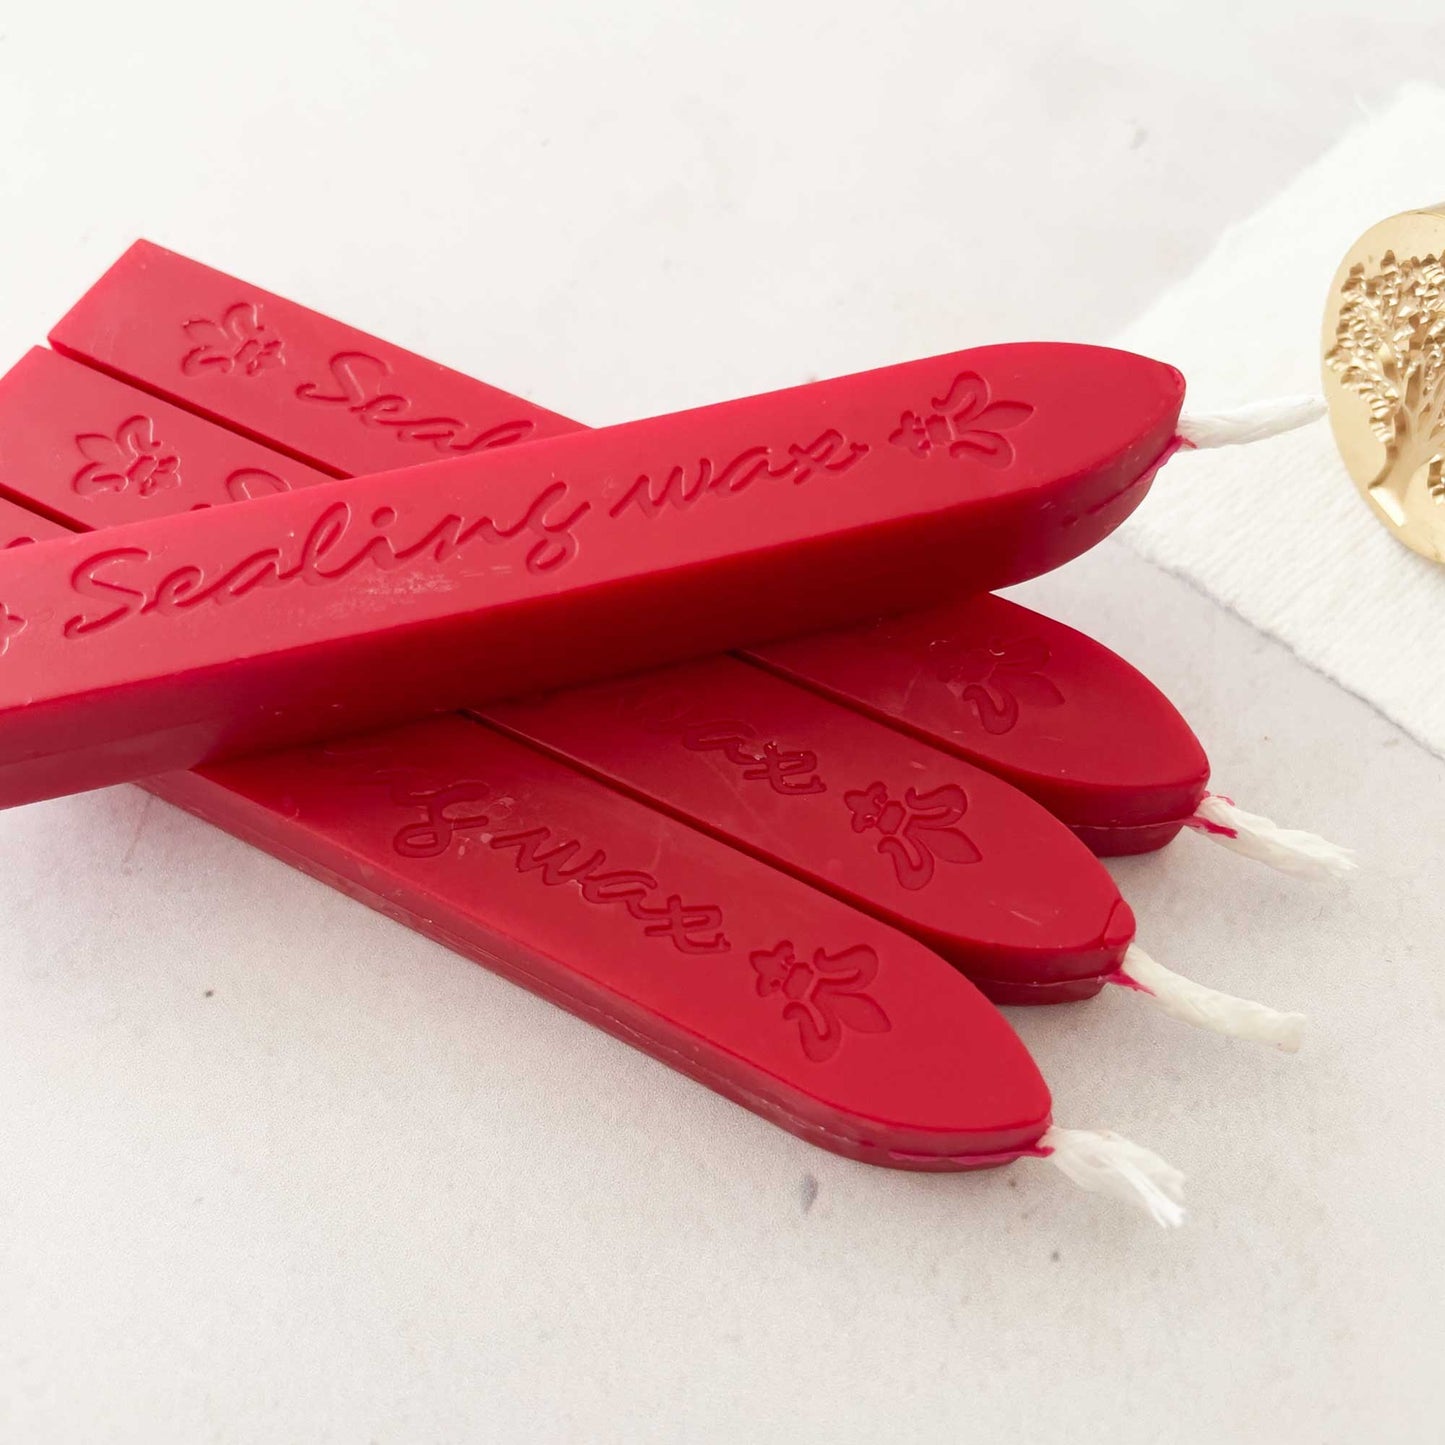 Red Wax For Letters Stamp Seals Sealing Wax Kit With Wax Seal Beads Wax  Seal Warmer Wax Spoon And C